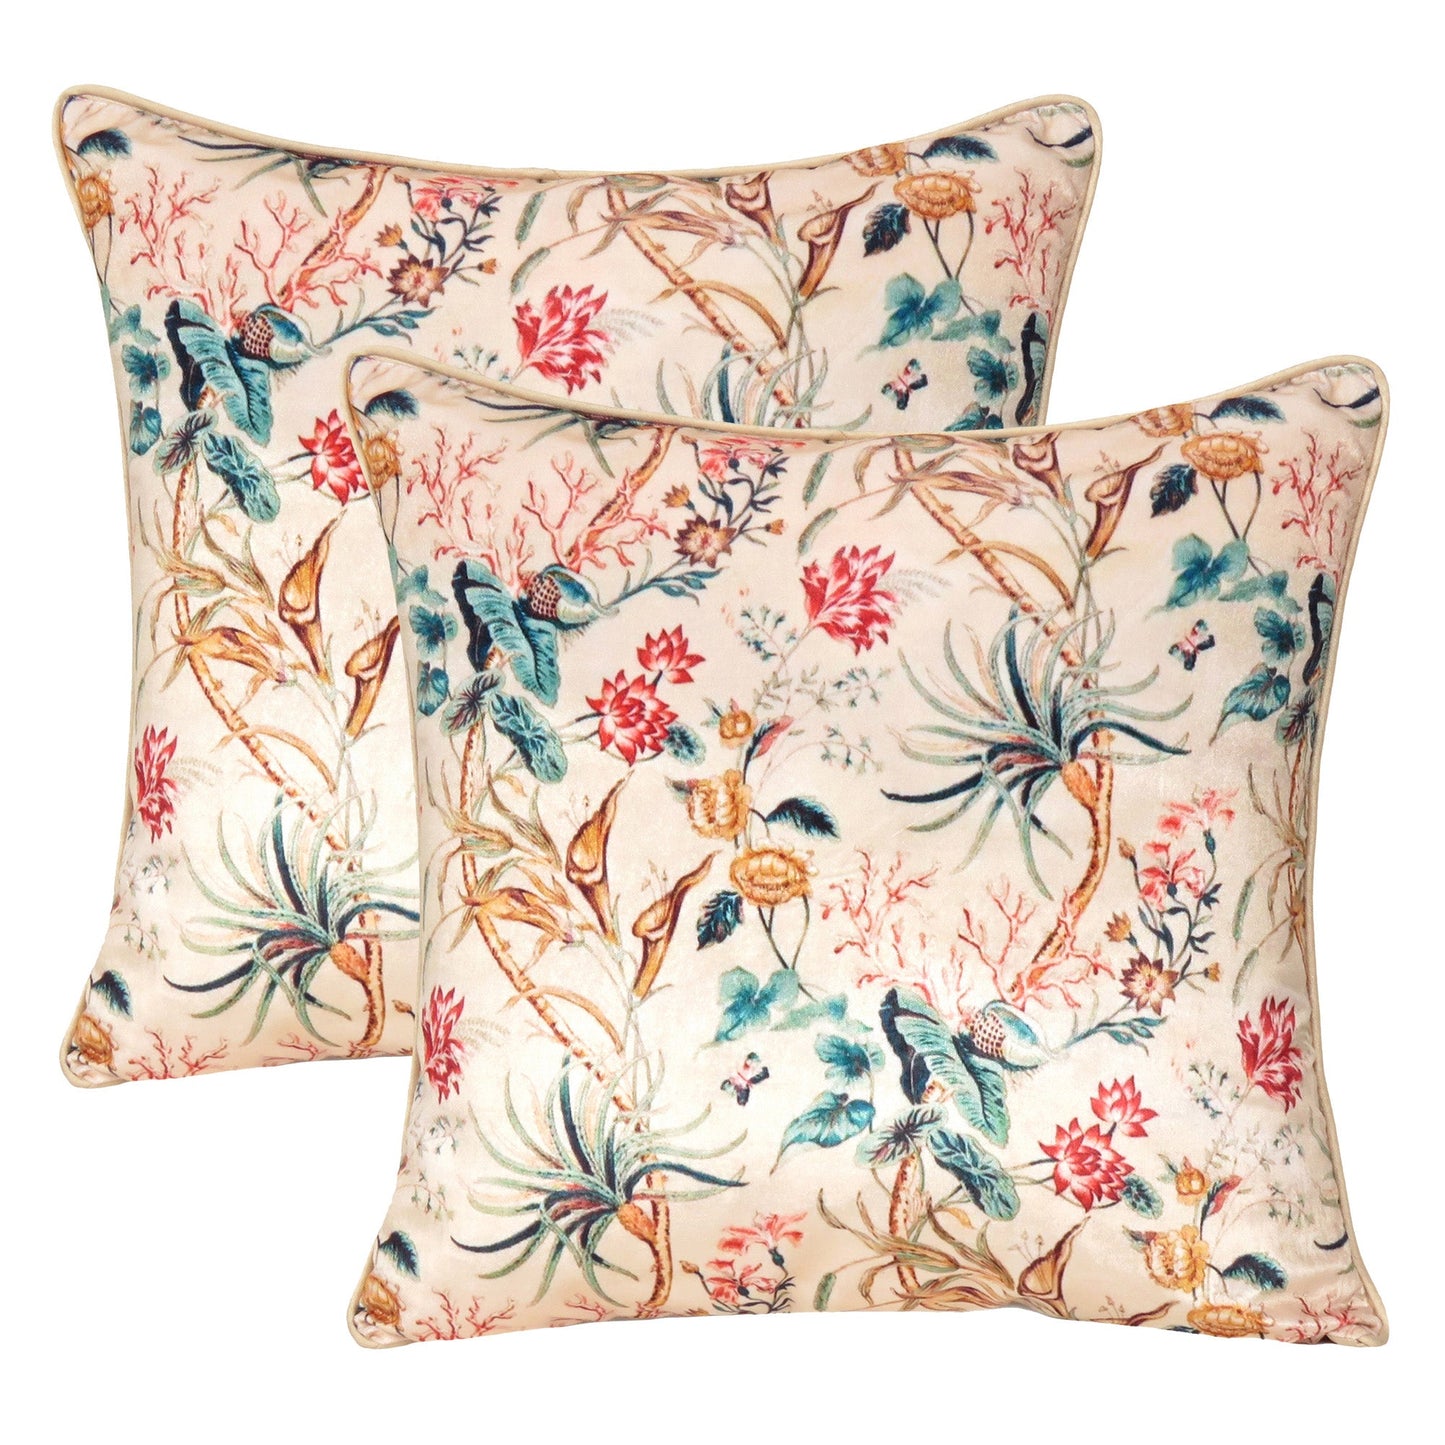 Velvet Polydupion Printed Cushion Covers in Set of 2 - Beige